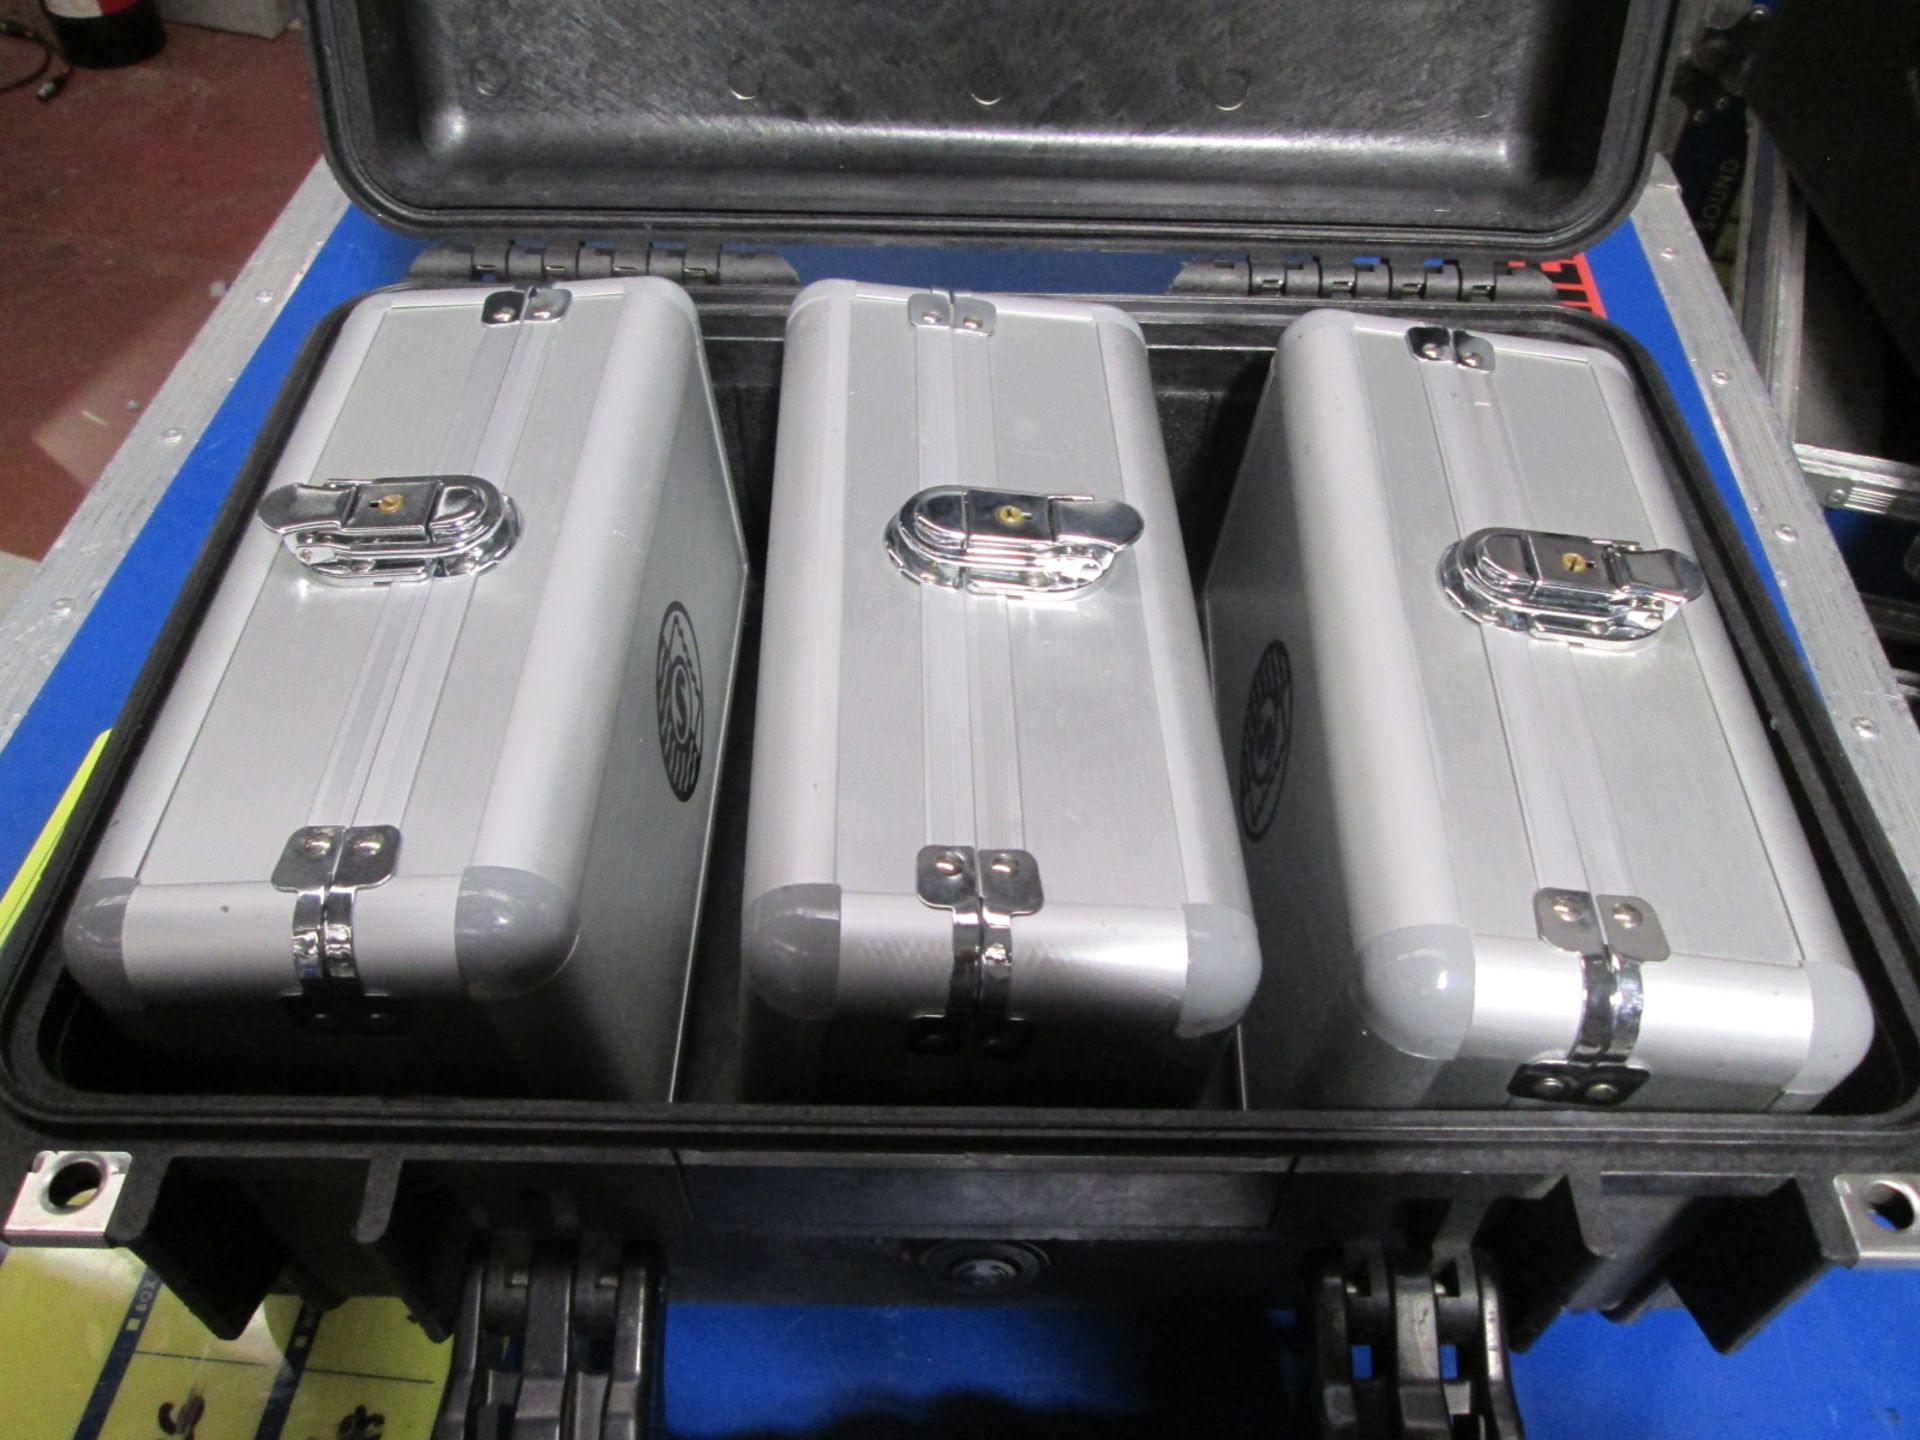 Shure KSM9 Dynamic Microphones (Qty 3) In flight and peli case - Image 7 of 8